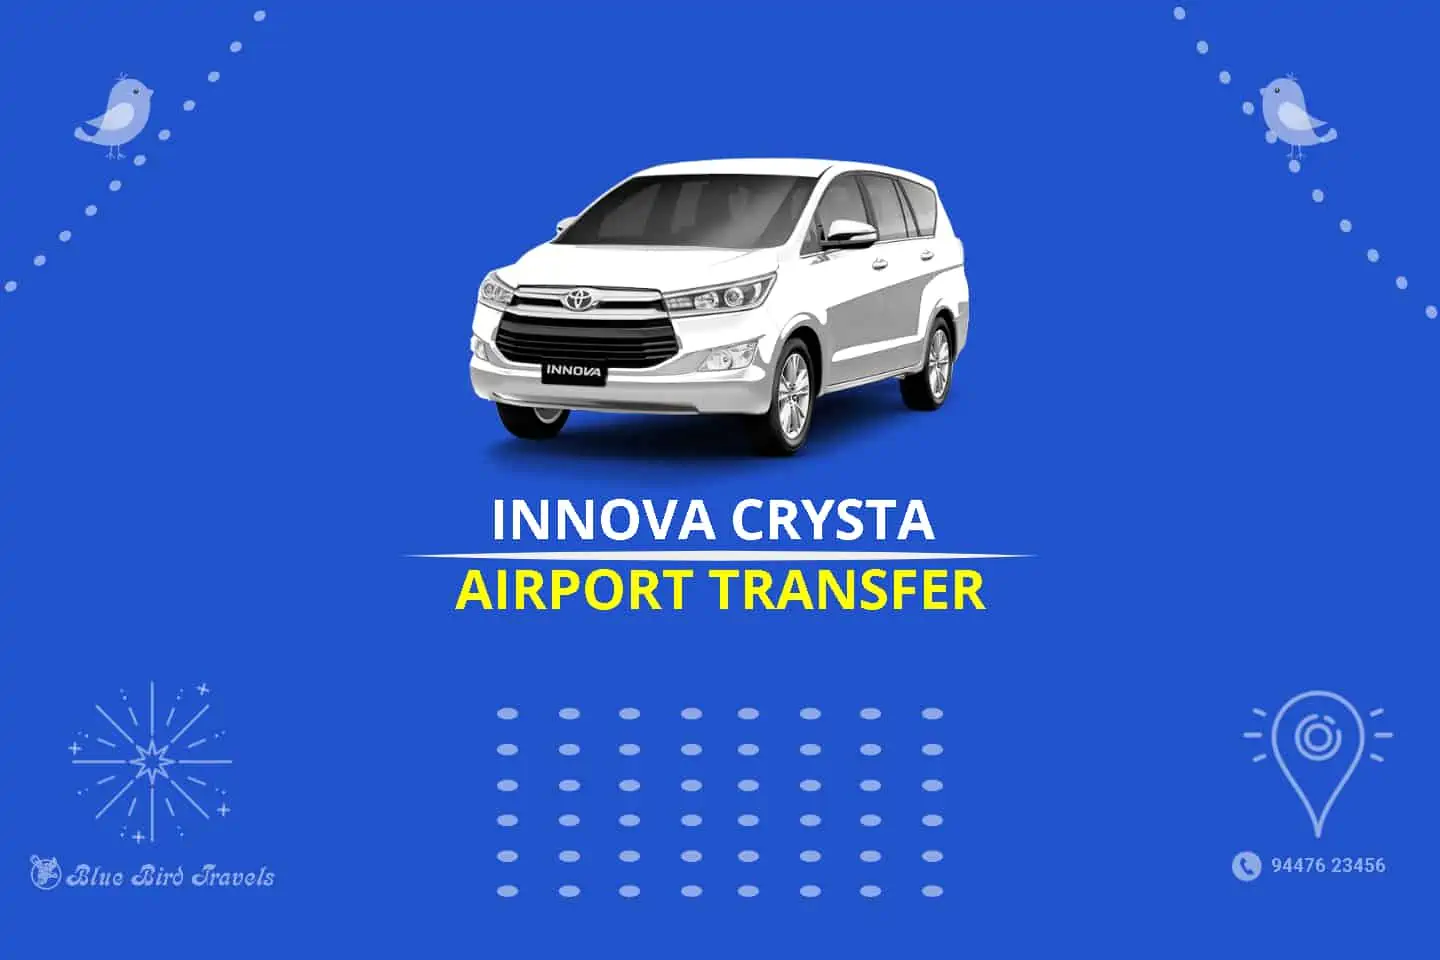 Innova Crysta - Airport Transfer (Featured Image)